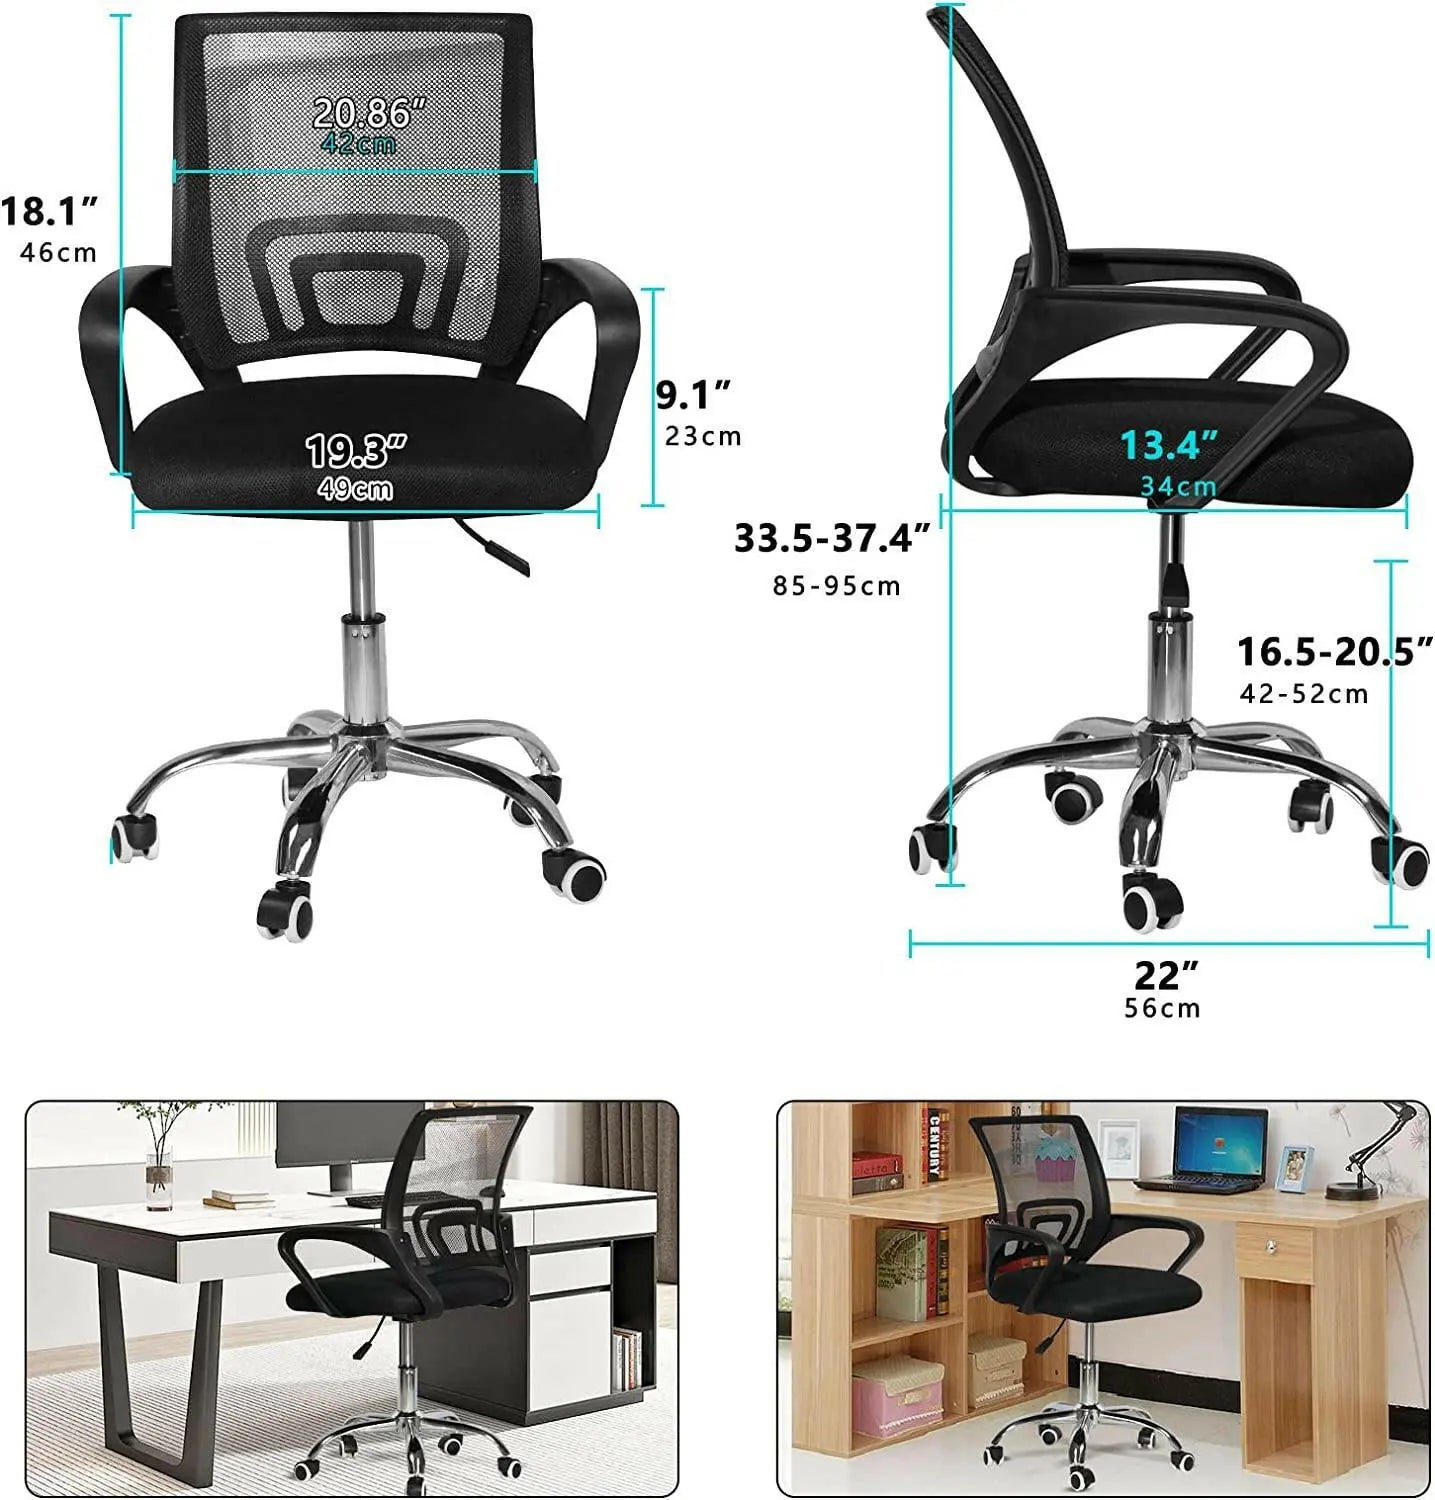 SKY TOUCH Office Chair,Comfort Ergonomic Height Adjustable Desk Chair with Lumbar Support Backrest Black